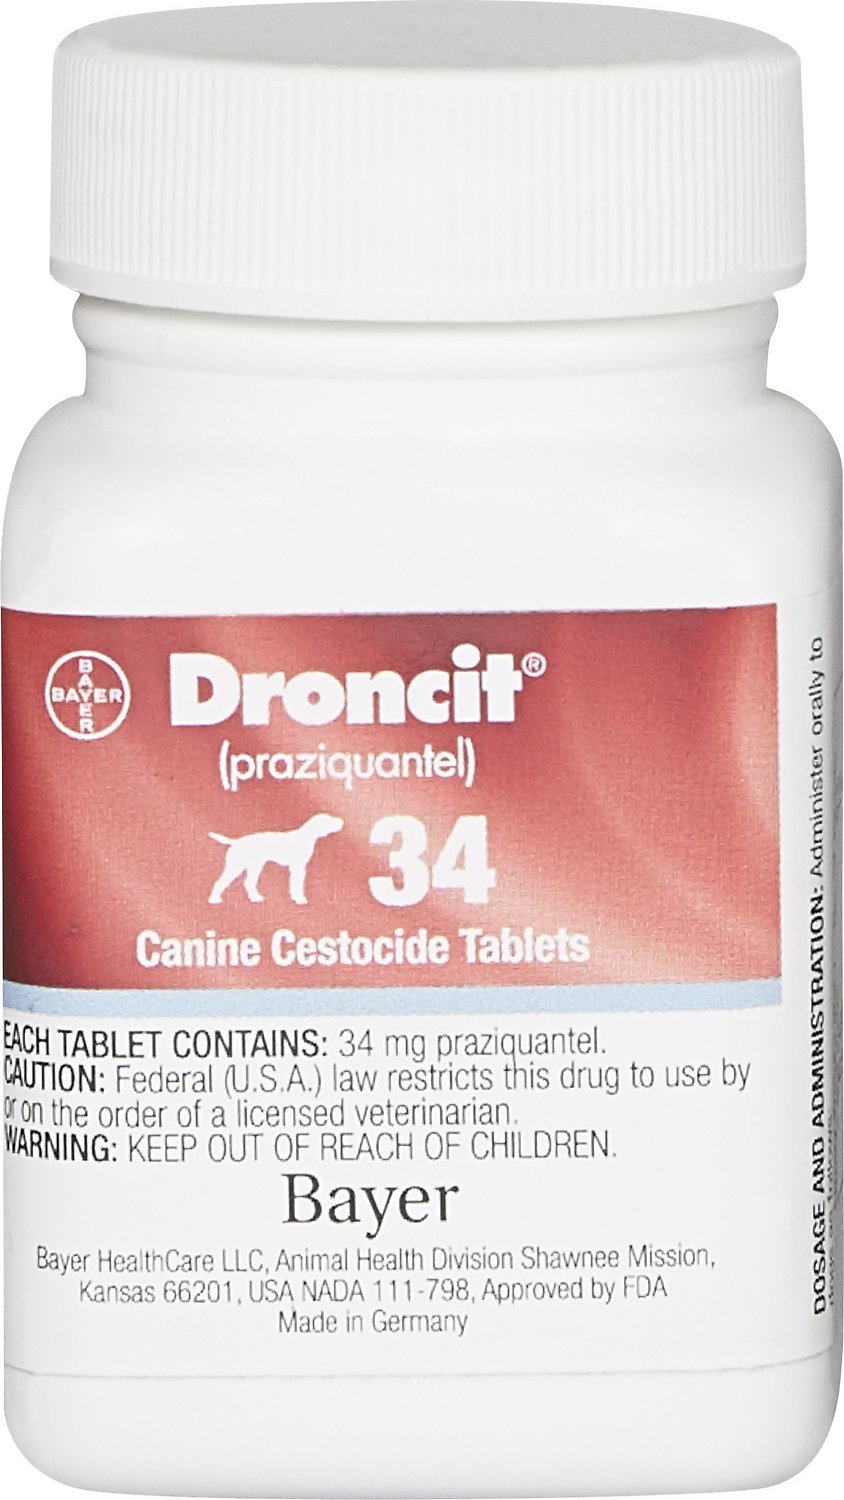 Droncit for Dogs